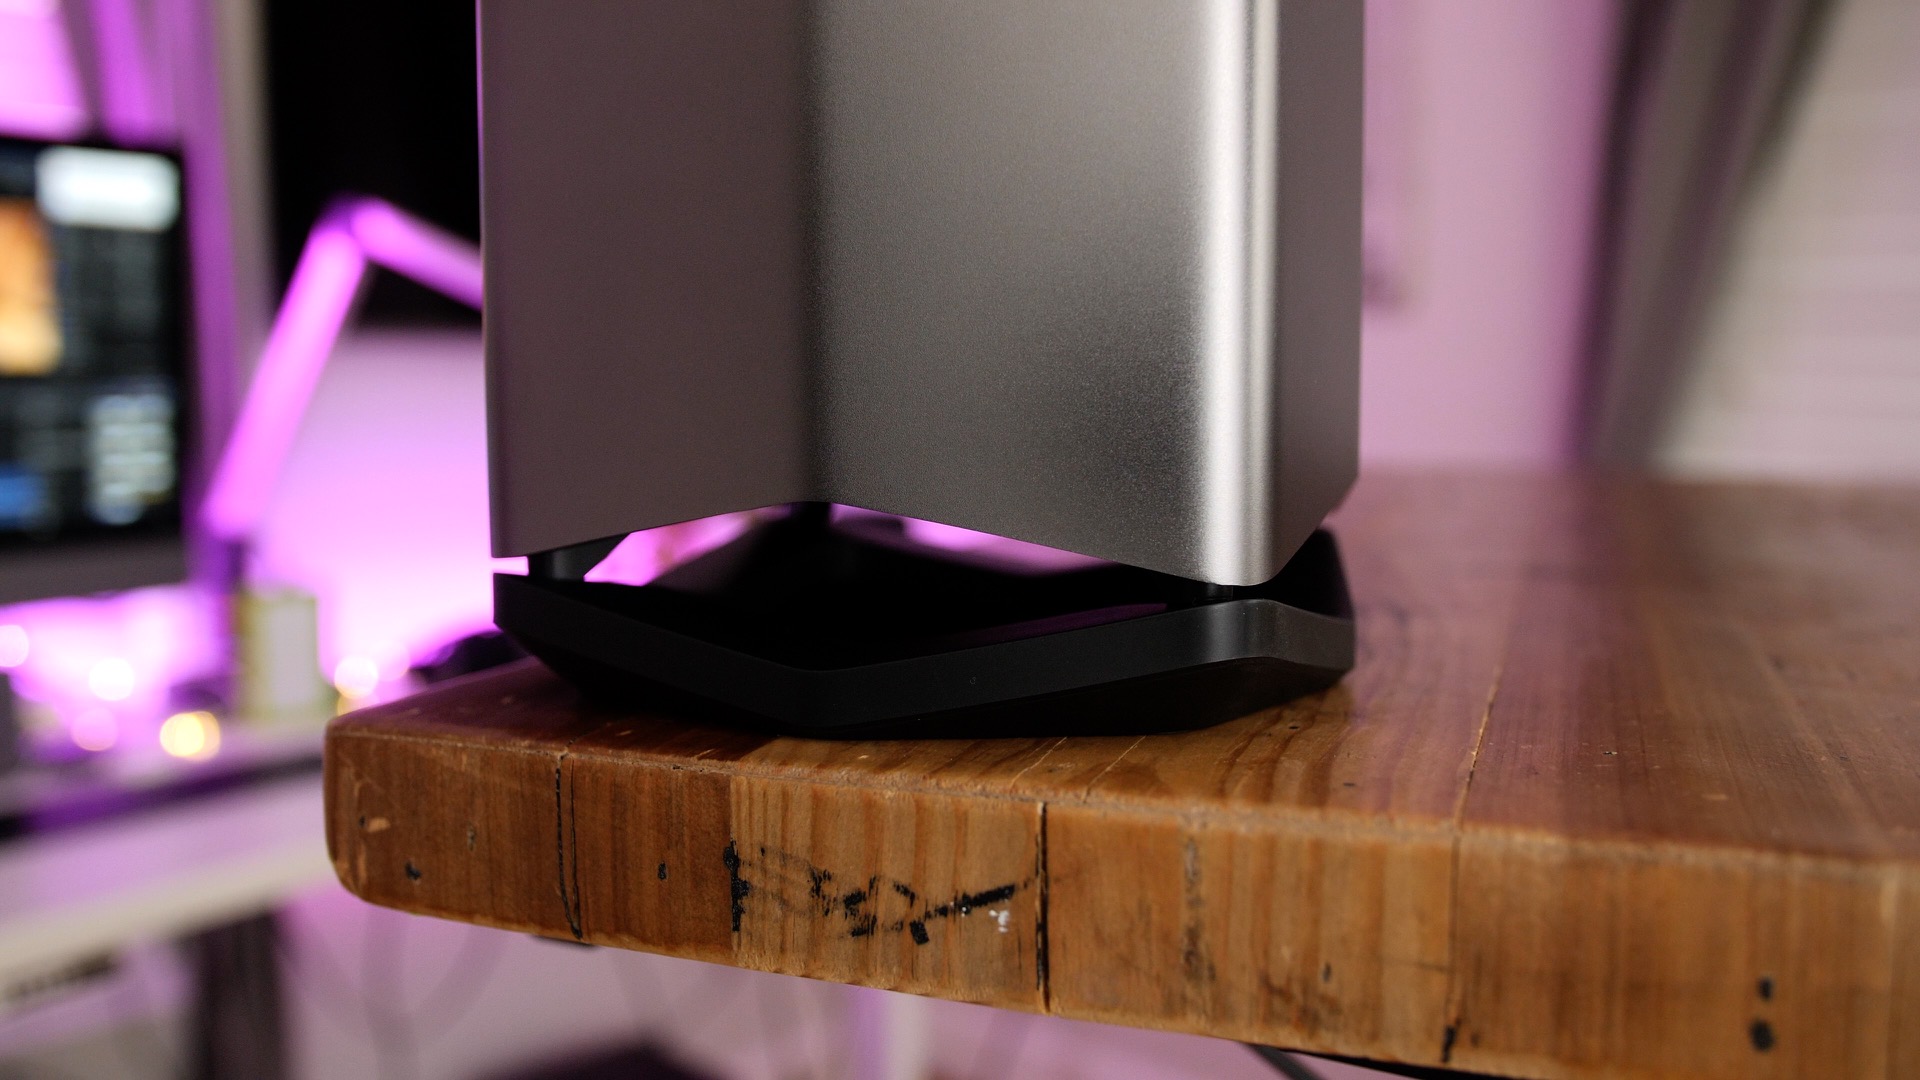 Review: Blackmagic eGPU - quiet, beautiful, and limited in scope [Video